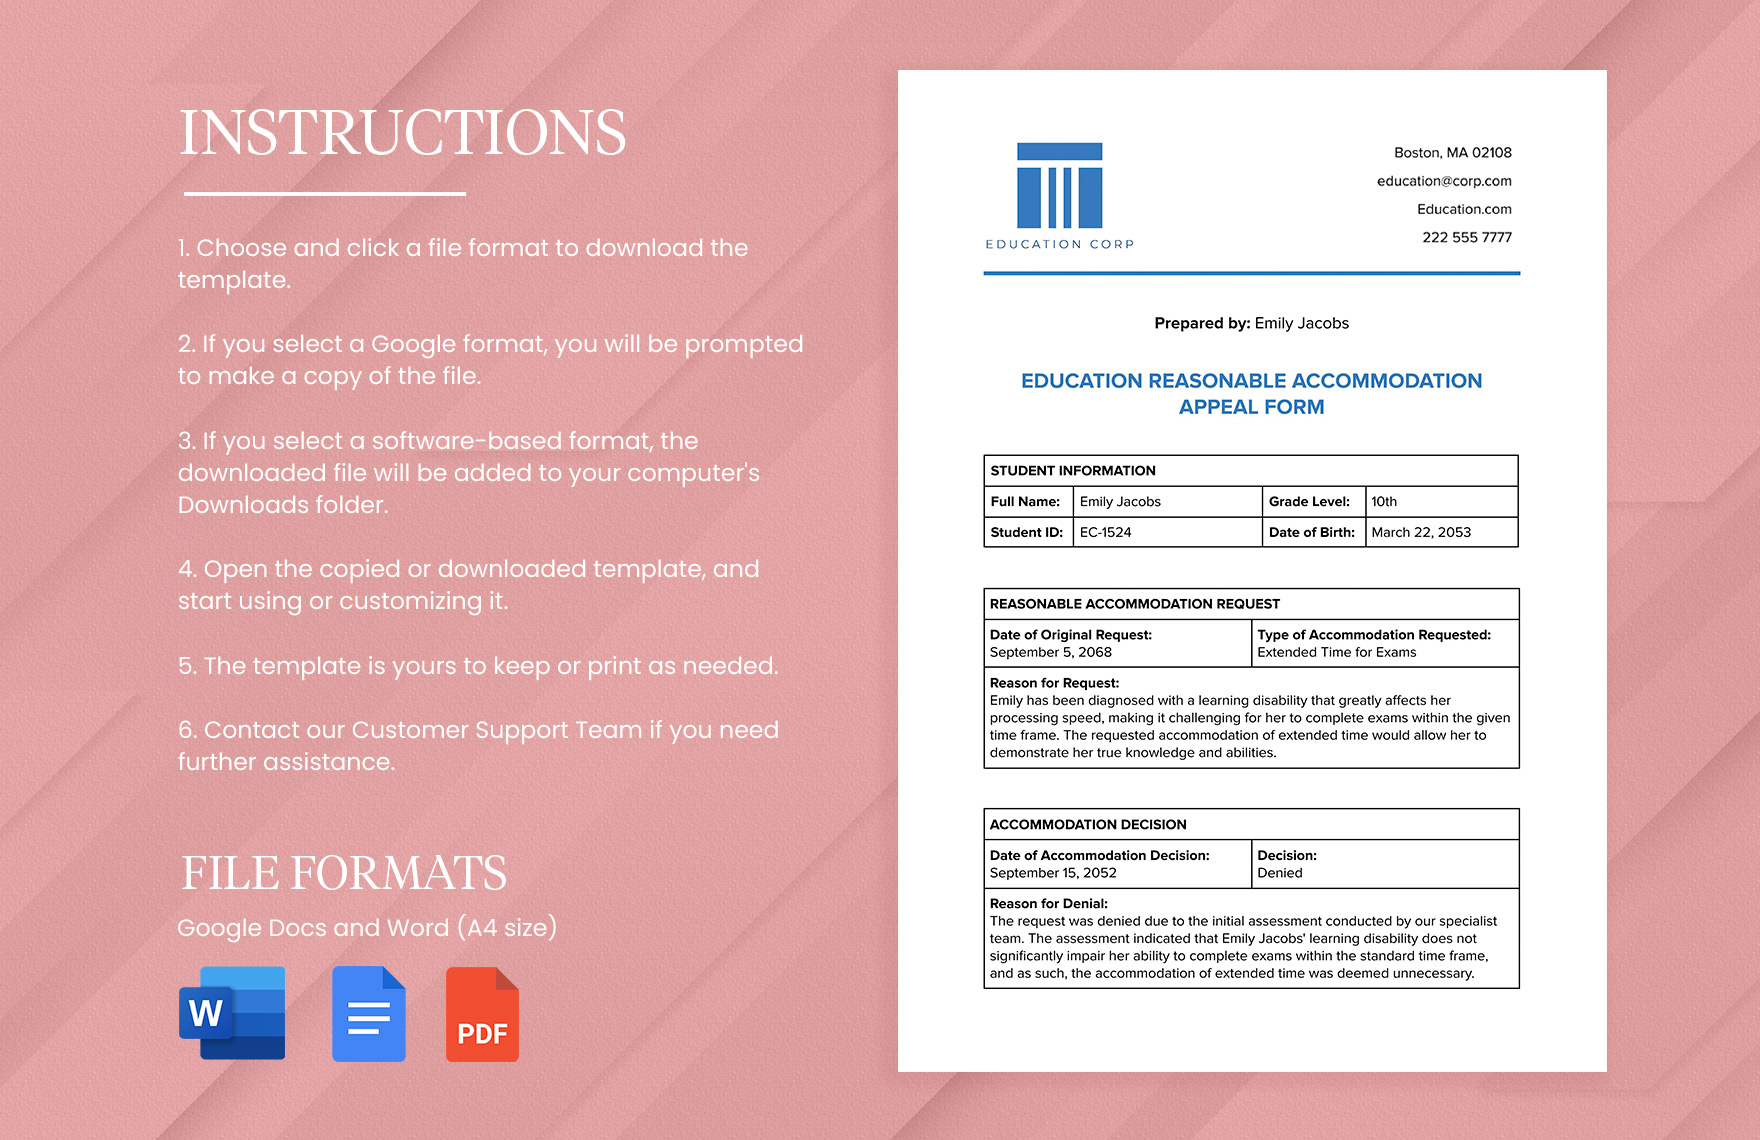 Education Reasonable Accommodation Appeal Form Template